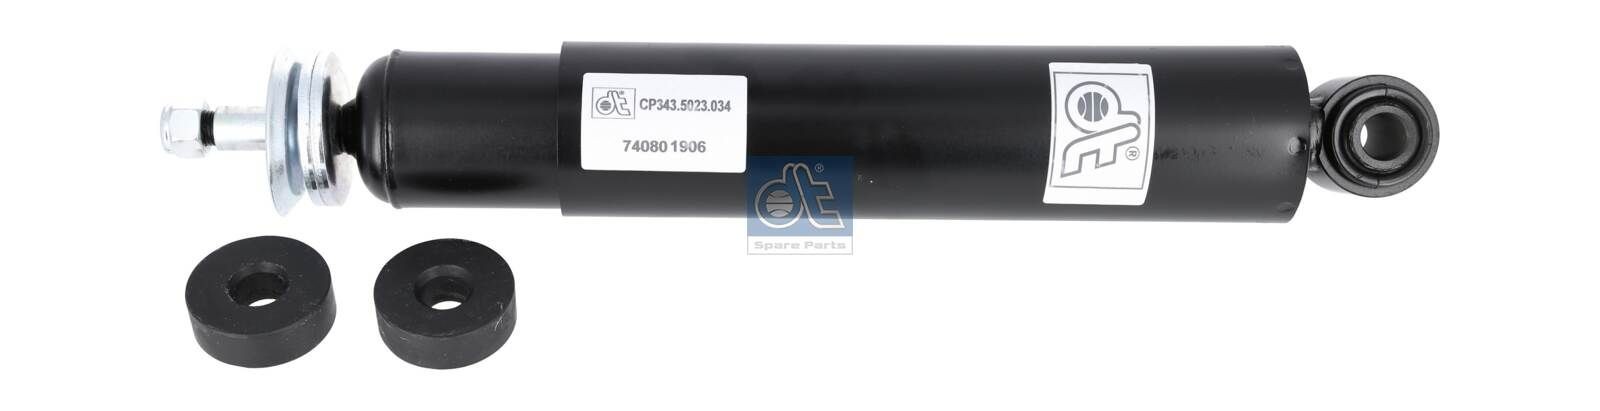 DT Spare Parts 6.12034 Shock absorber Rear Axle, Oil Pressure, Telescopic Shock Absorber, Top eye, Bottom Pin